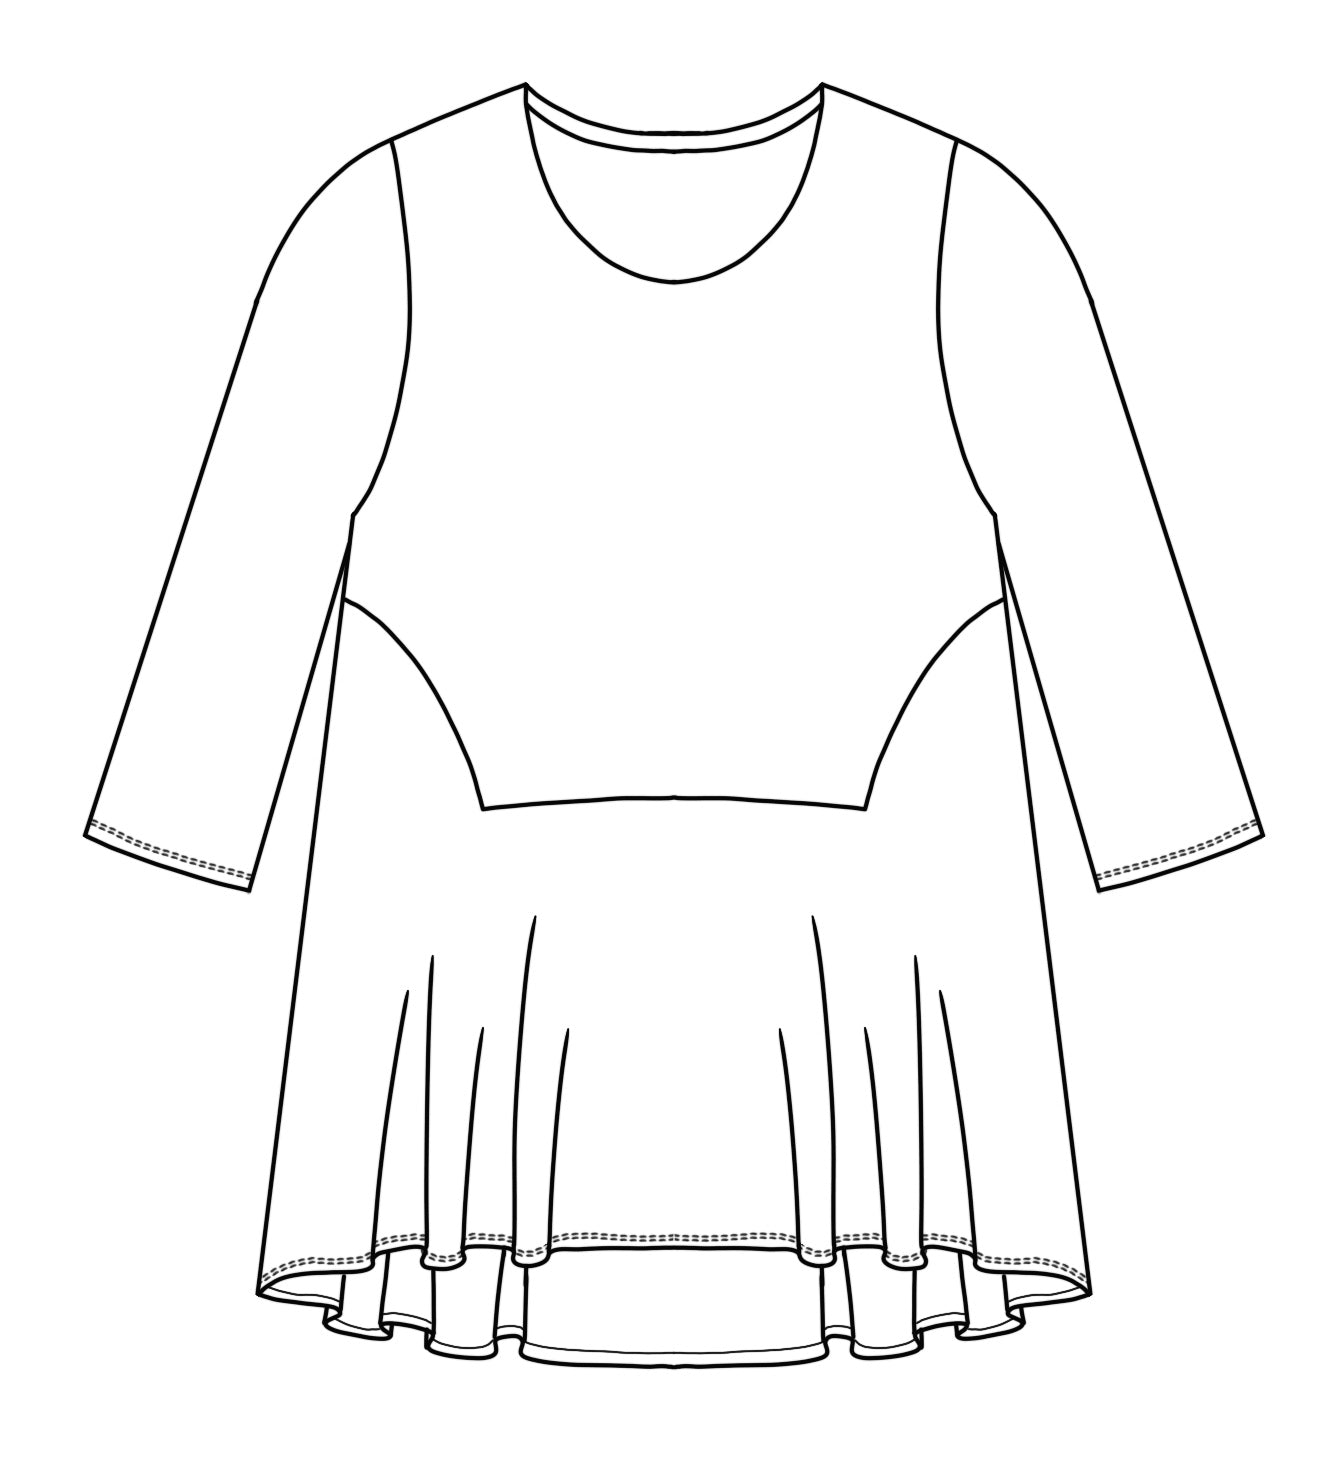 flat drawing of a top with a contrasting bottom